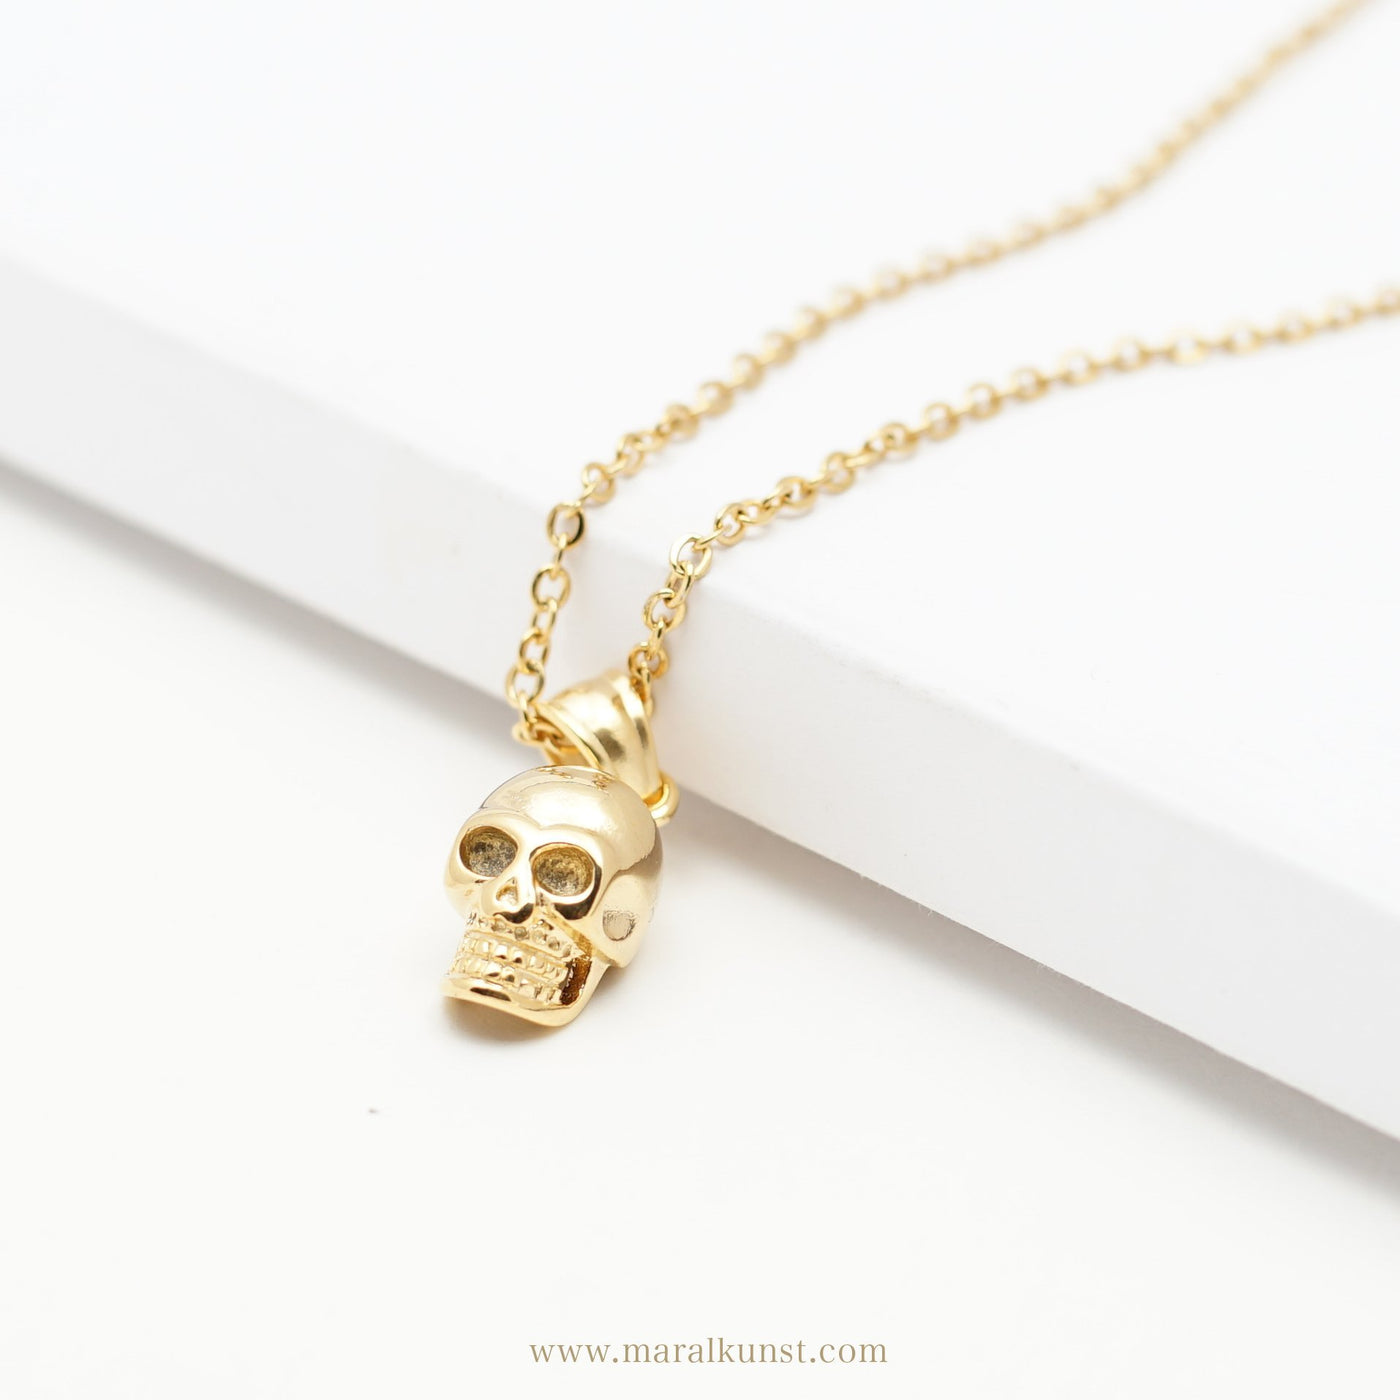 Delicate Human Skull Necklace - Maral Kunst Jewelry